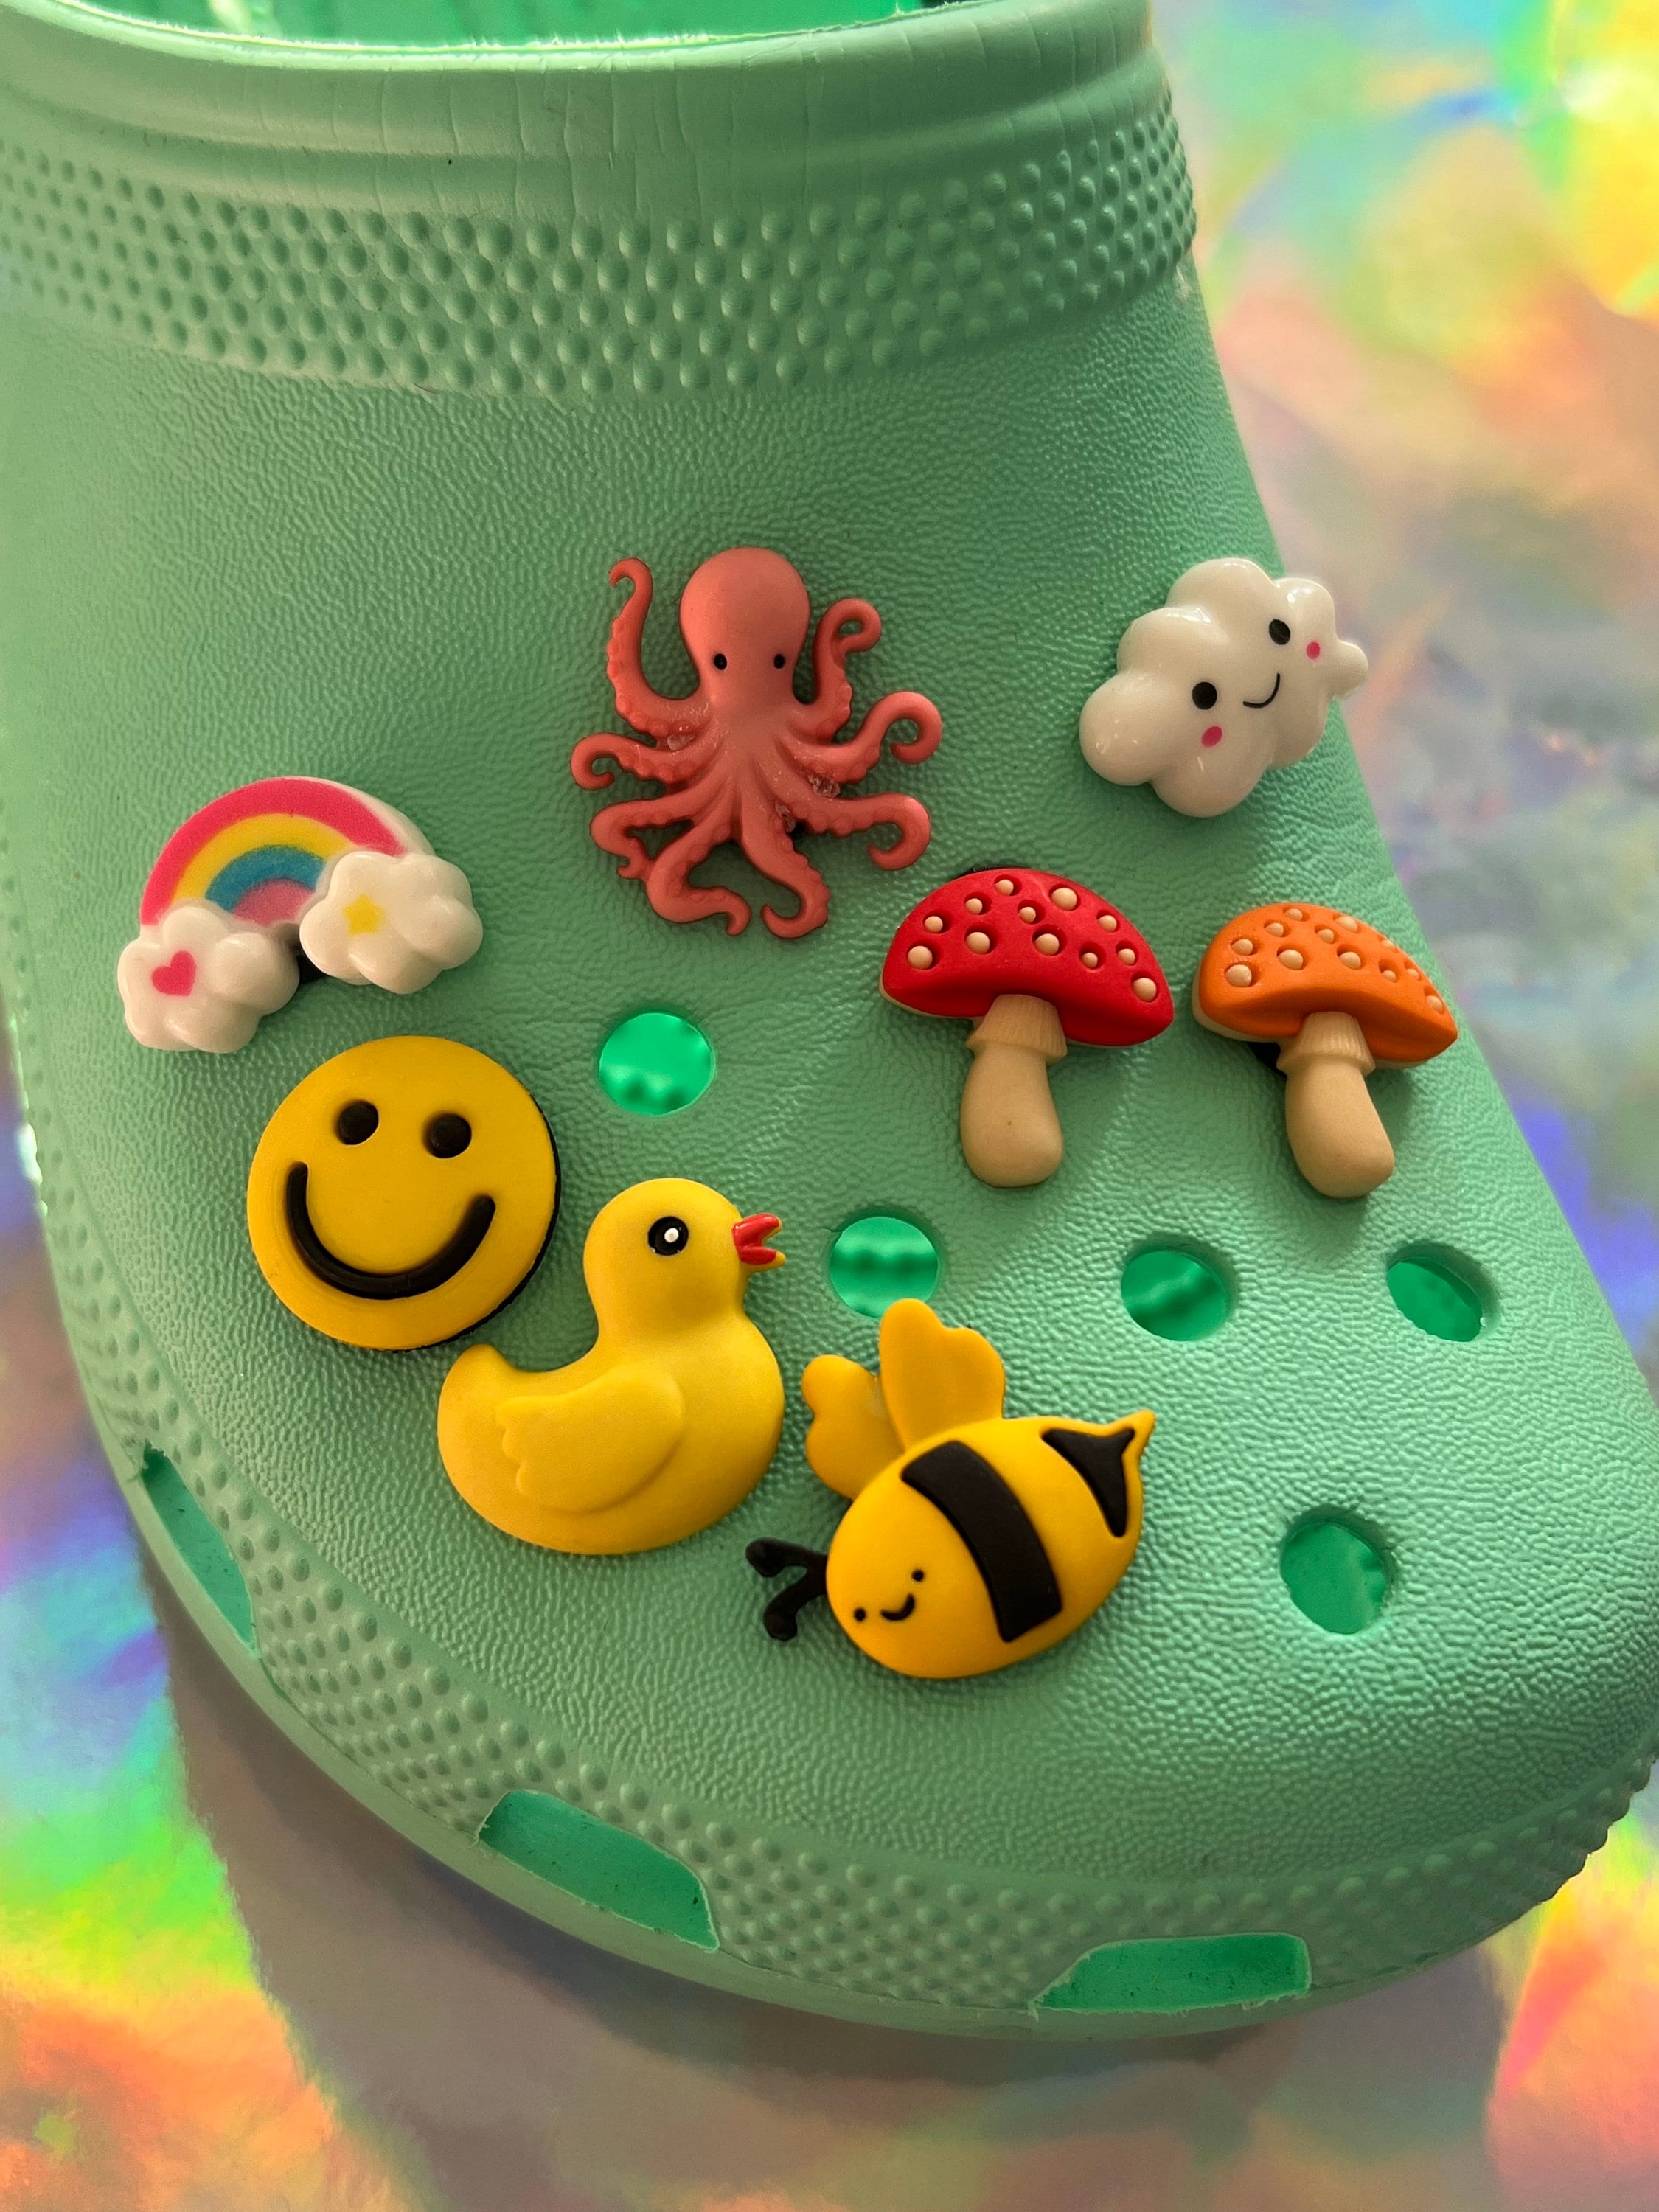 Indie & Women-Owned Brands That Make The Coolest Charms For Crocs